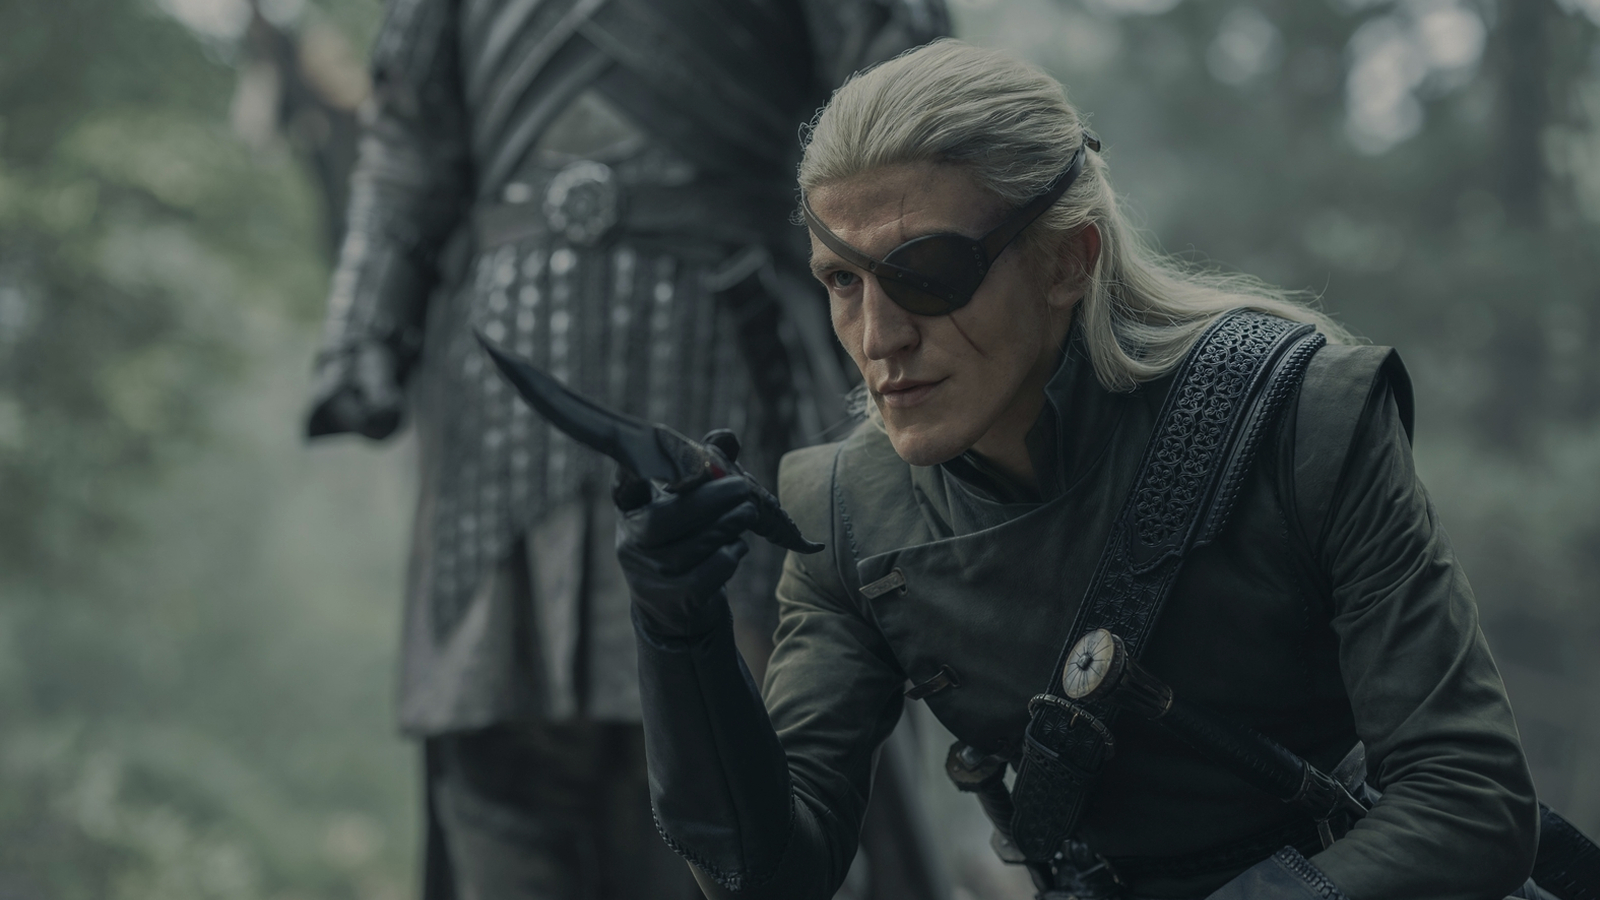 Prince Aemond Targaryen points with a Valyrian steel dagger in House of the Dragon Season 2, Episode 4